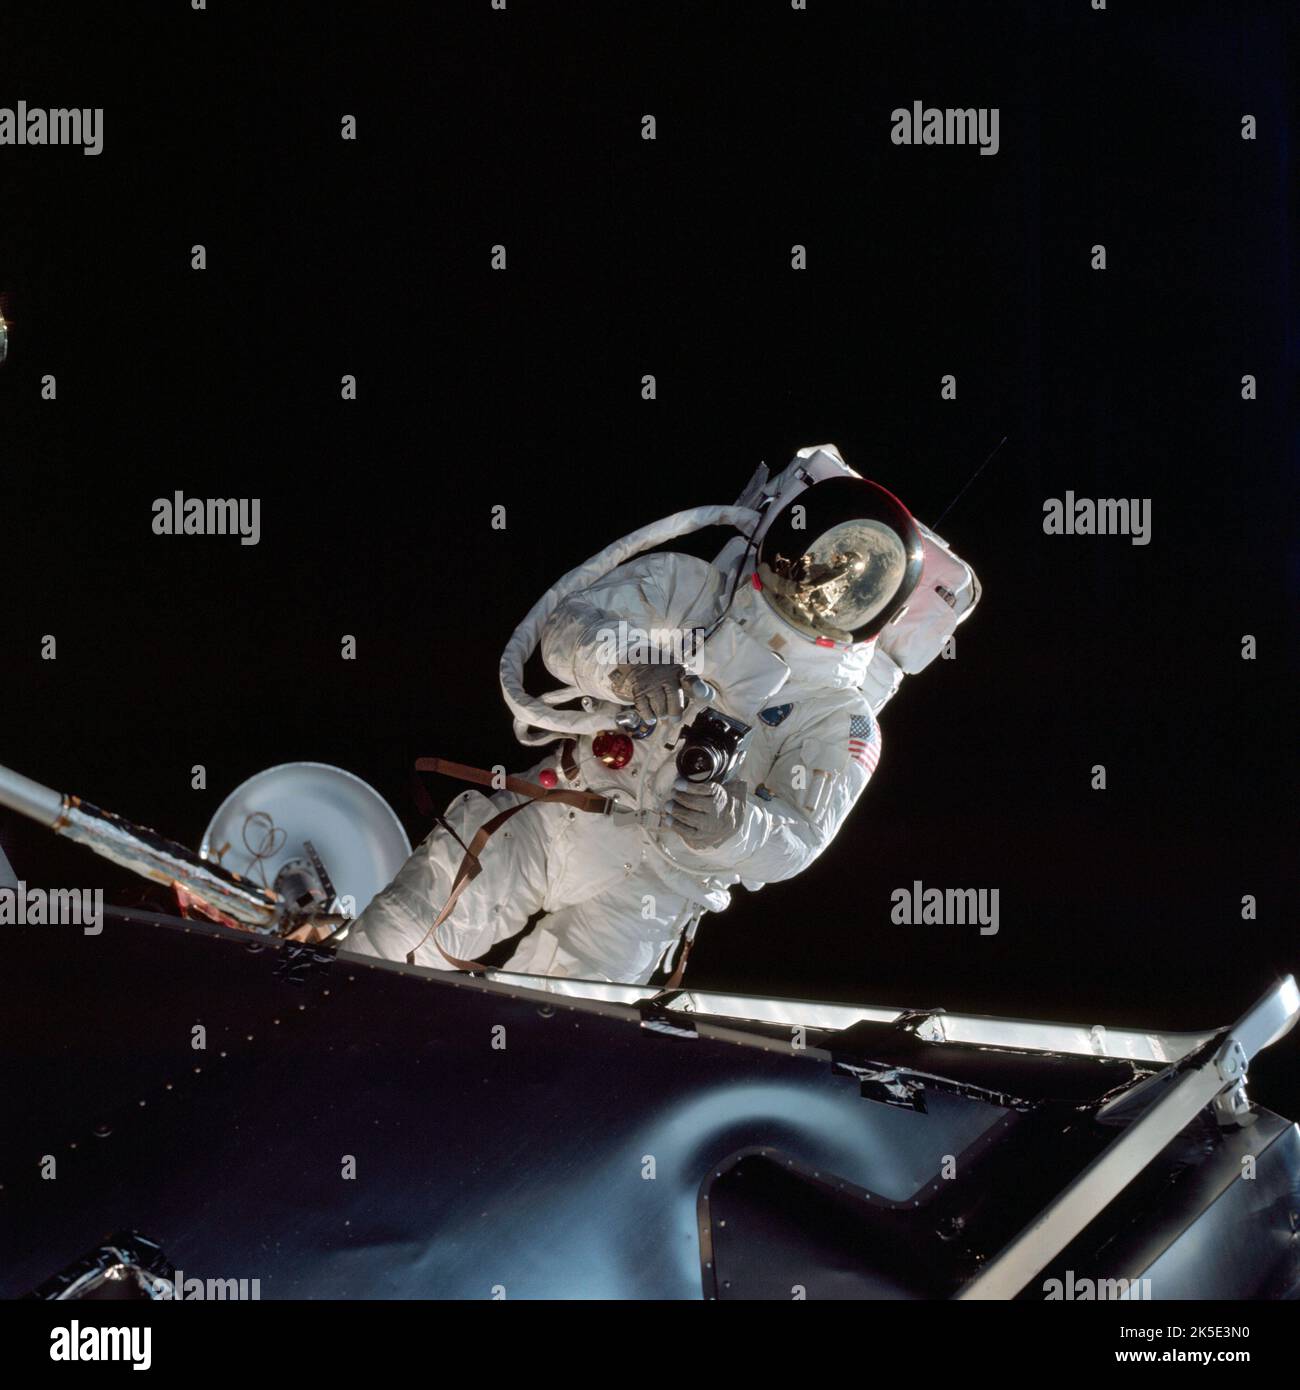 Apollo 9 astronaut Russell L. Schweickart performs a spacewalk with a Hasselblad camera on the fourth day of the Earth-orbital mission. The Apollo 9 spacecraft, in the lunar mission configuration, was tested in Earth orbit. The mission was designed to rehearse all the steps and reproduce all the events of the Apollo 11 mission with the exception of the lunar touchdown, stay and liftoff. The Command and Service Module, and the Lunar Module were used in flight procedures identical to those that would later take similar vehicles to the moon.  An optimised NASA image: Credit: NASA Stock Photo